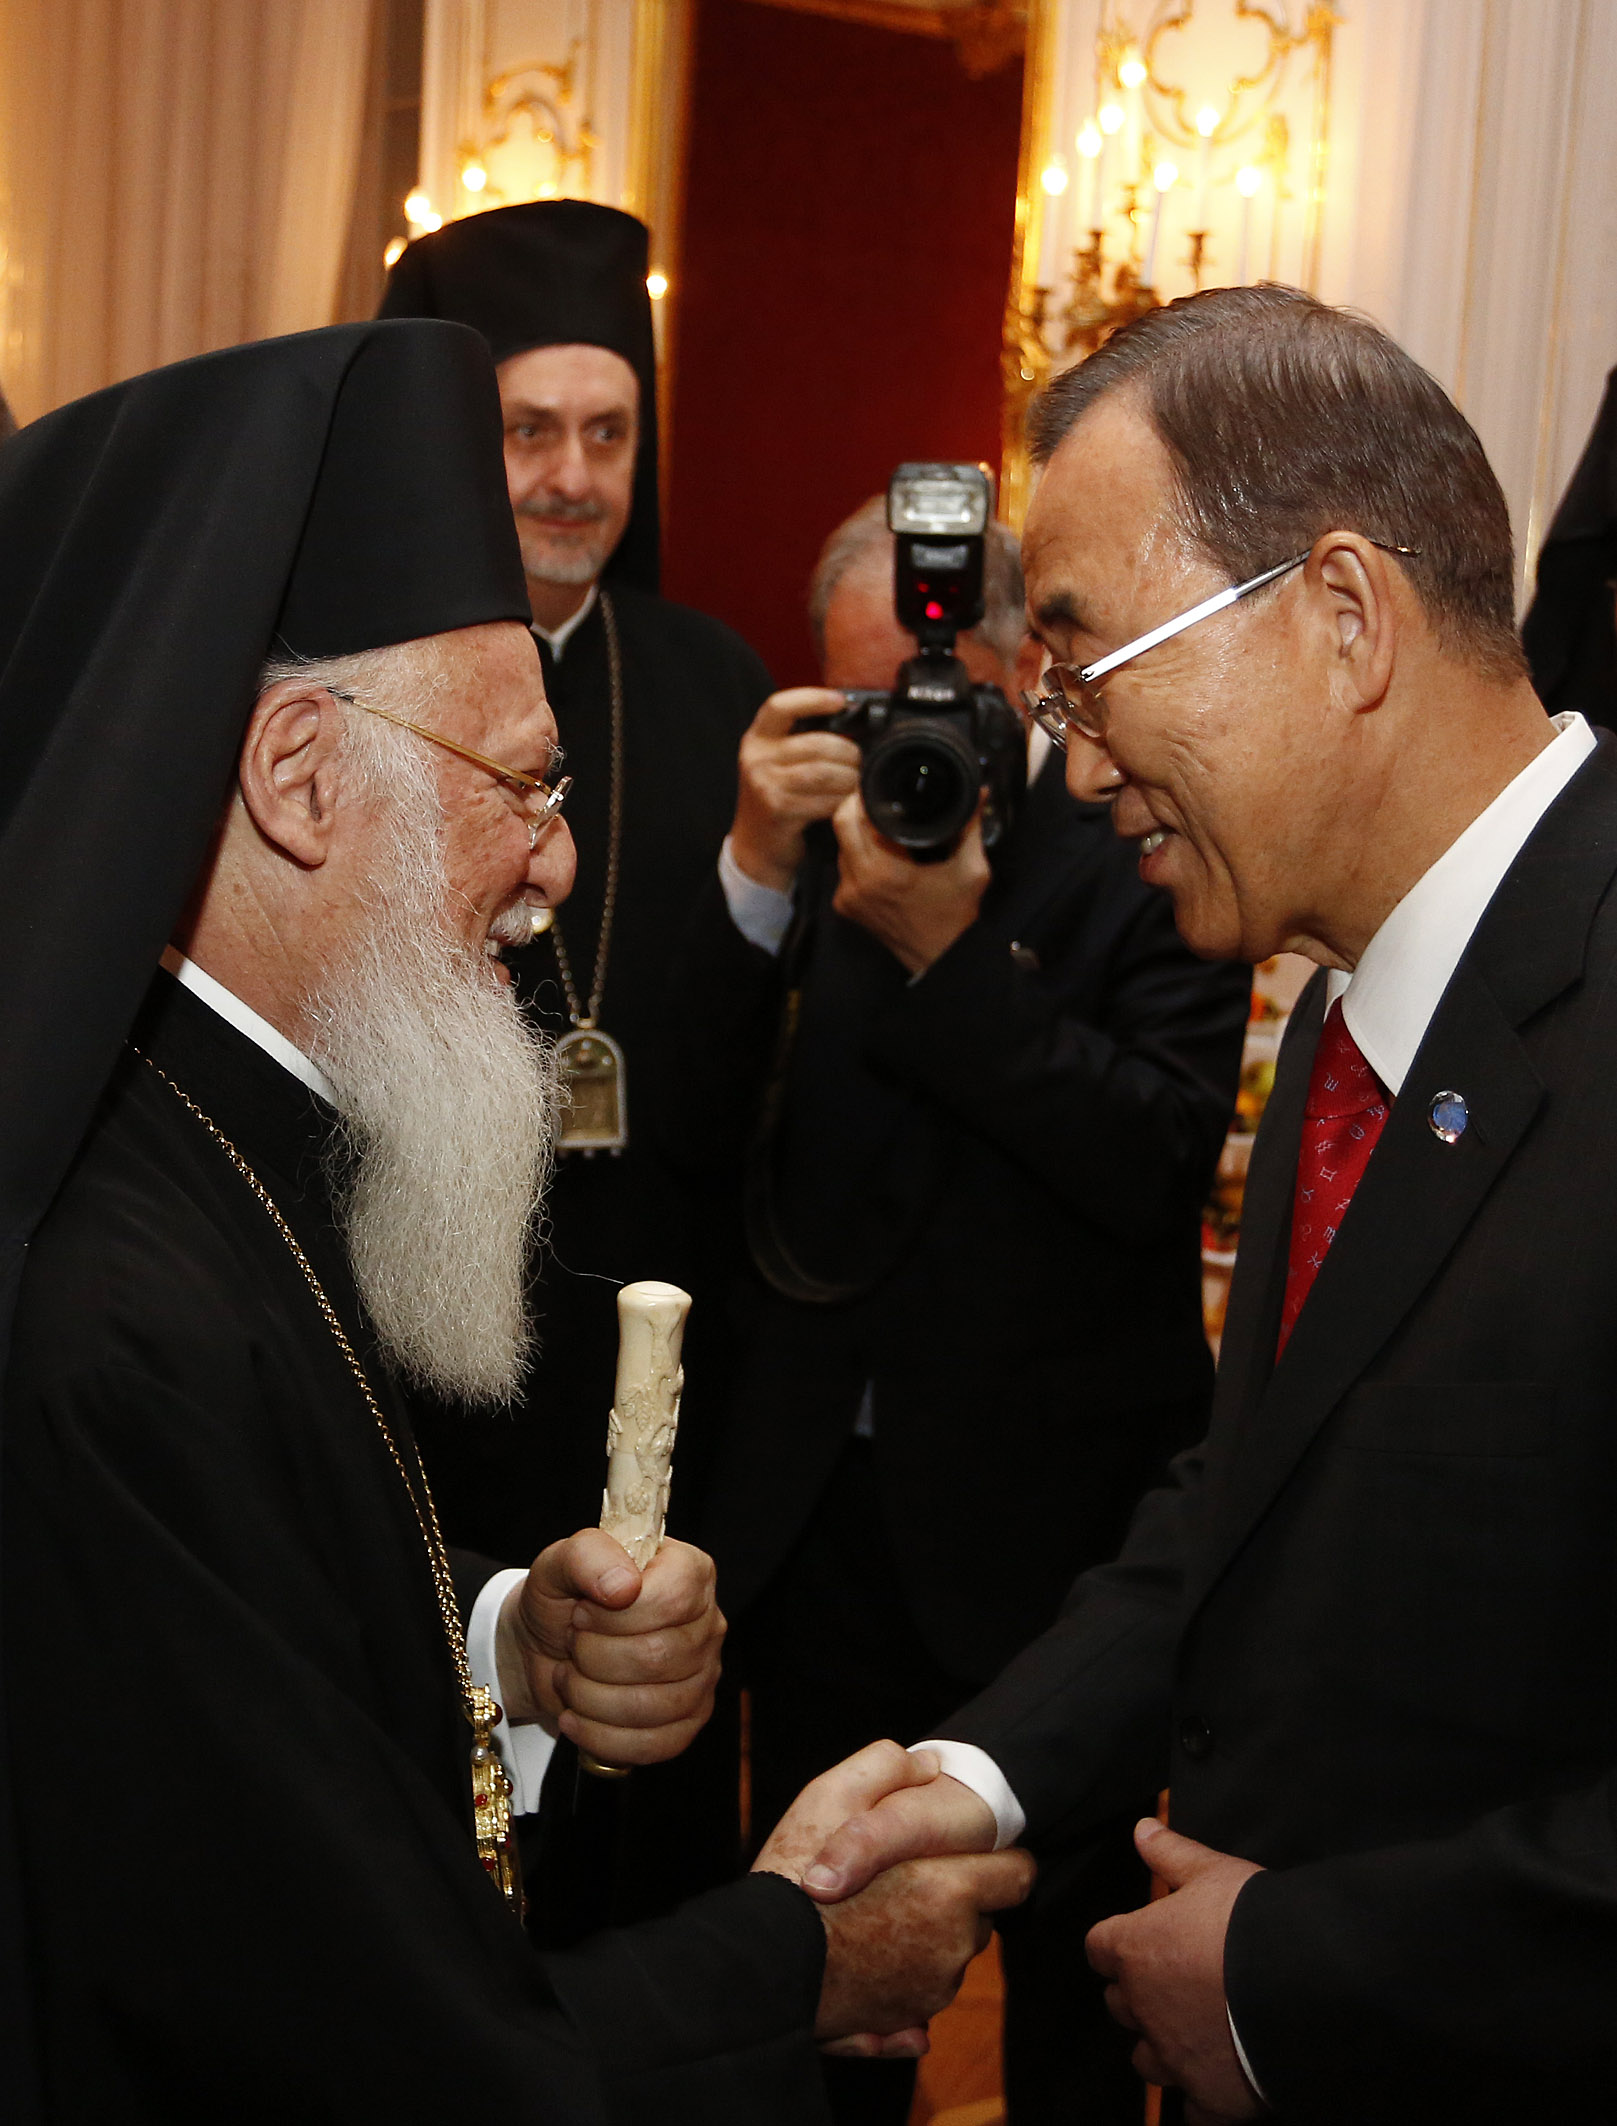 two men shaking hands, one wearing a religious garb and holding a bat